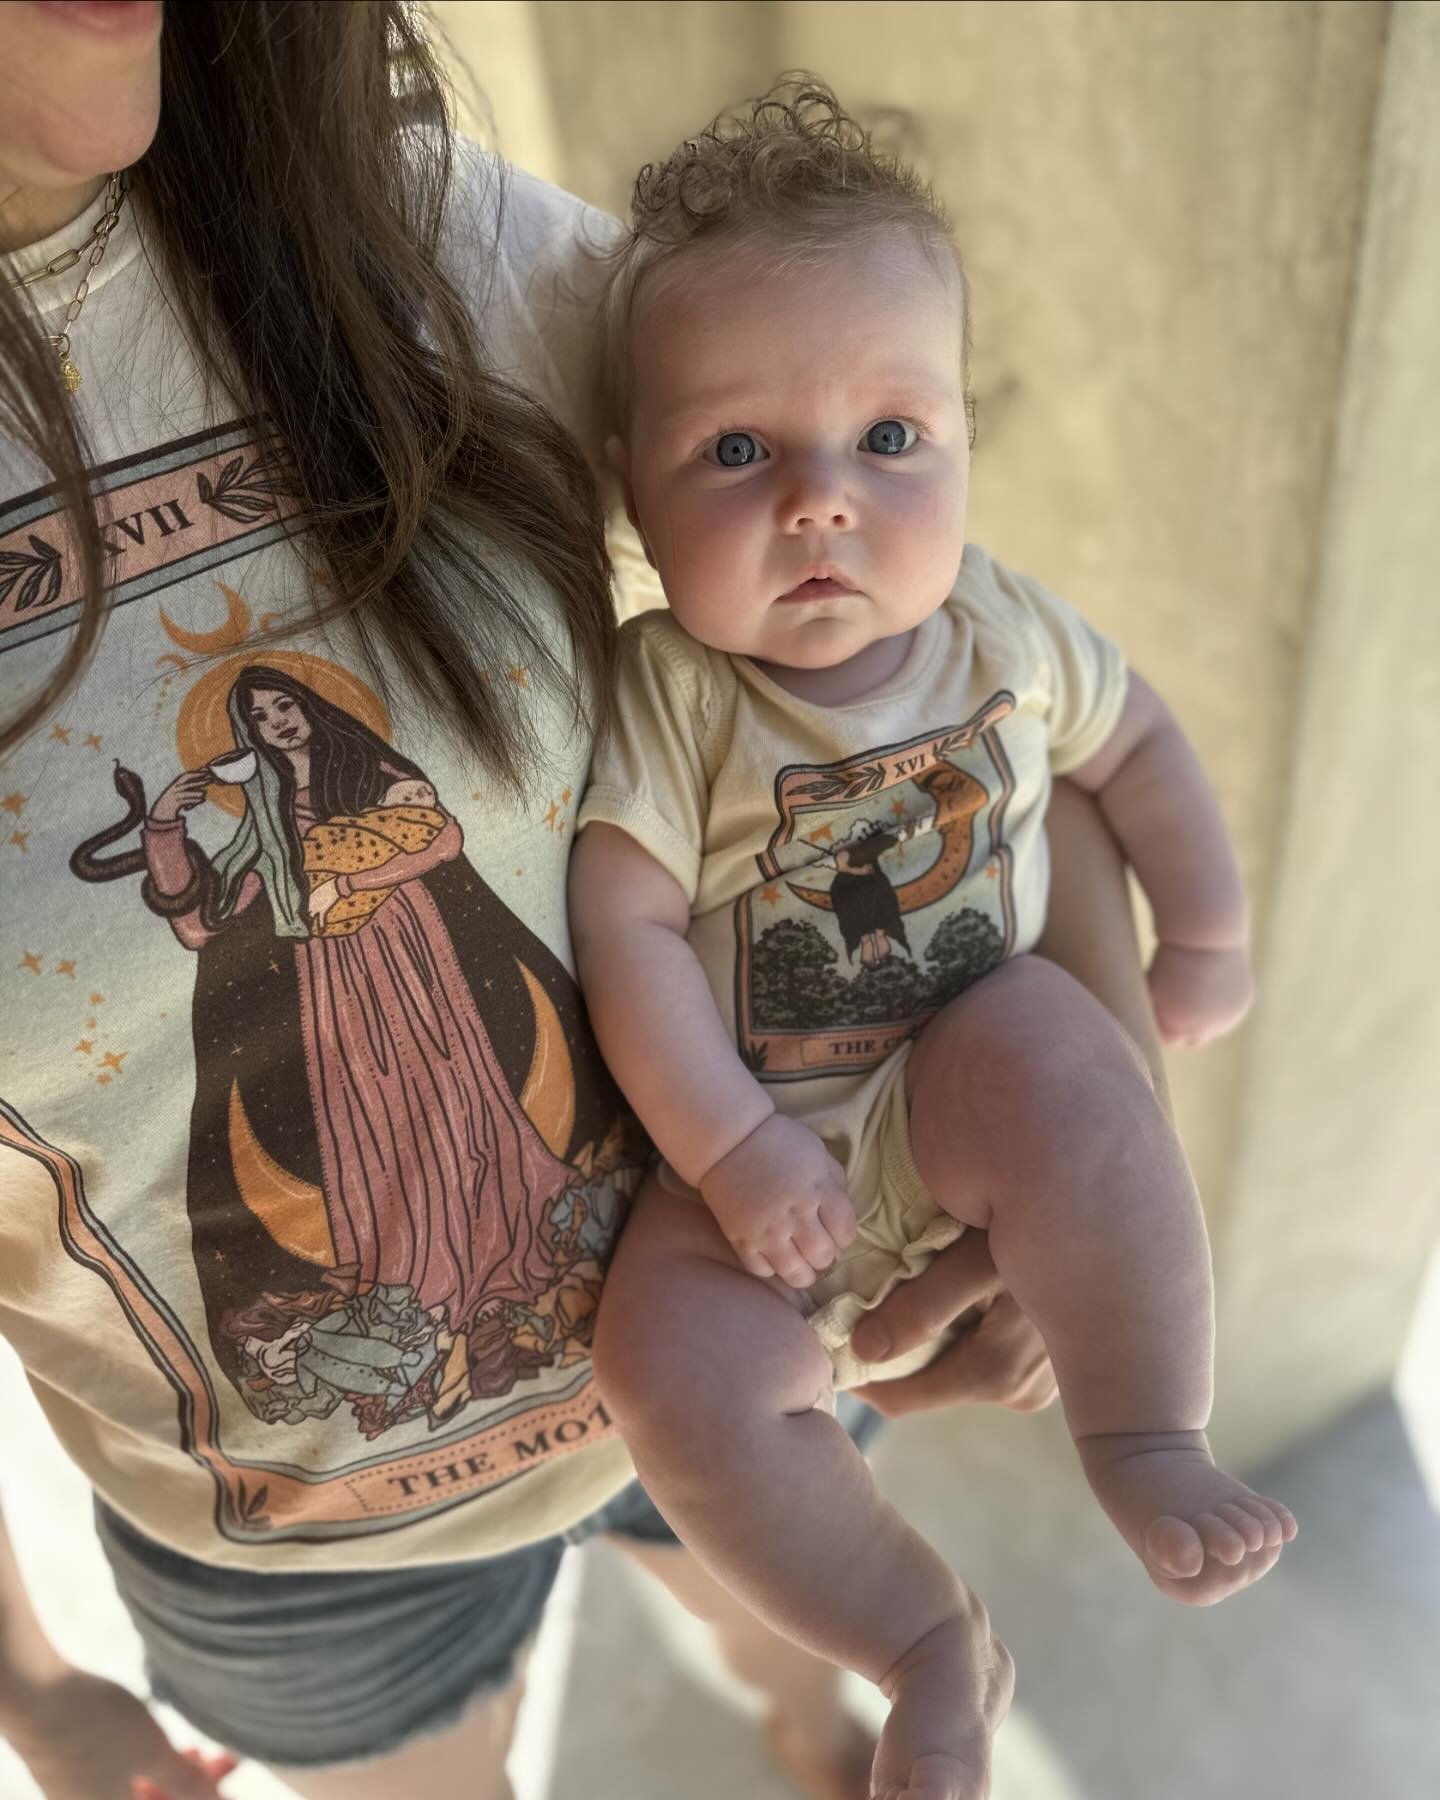 mother//child (IRL and on tarot card tees). so many things i love in one. 🔮🤍

tarot played a fun role for me revealing my pregnancy to some friends, too. 

thanks @sedilley for dressing us today 😉